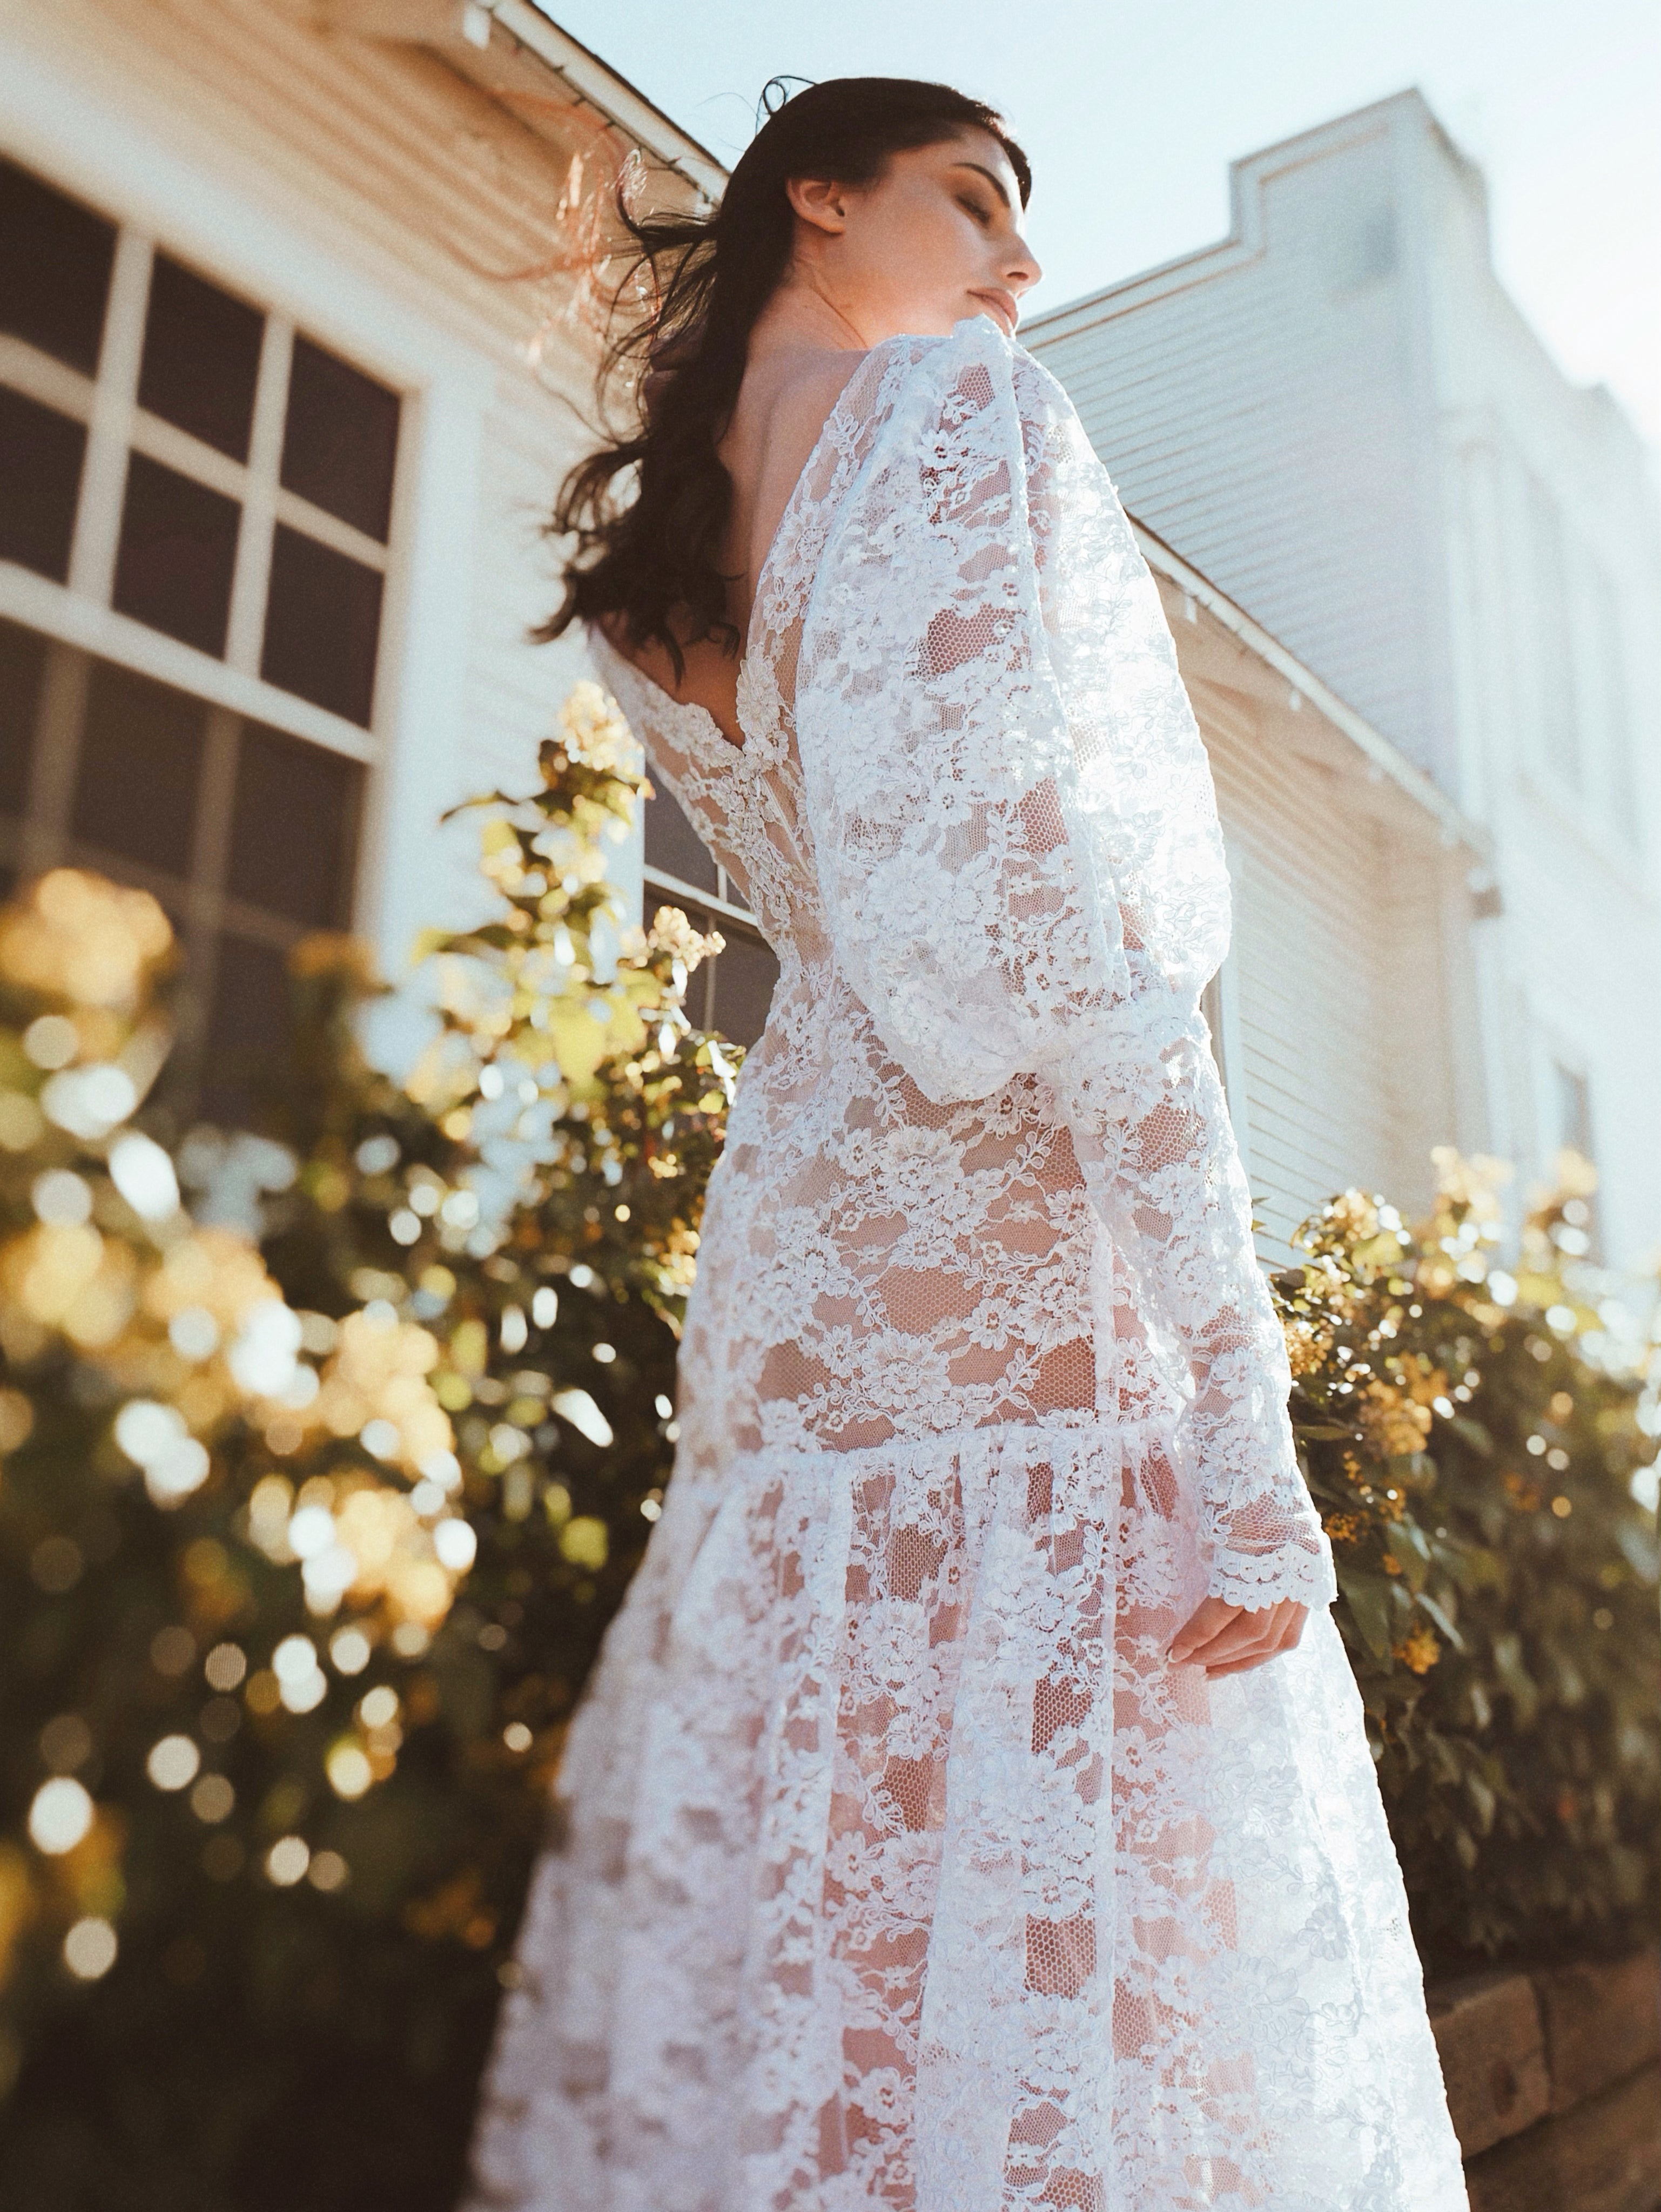 Bohemian and vintage long sleeve lace wedding dress by Lauren Elaine Bridal of Los Angeles.